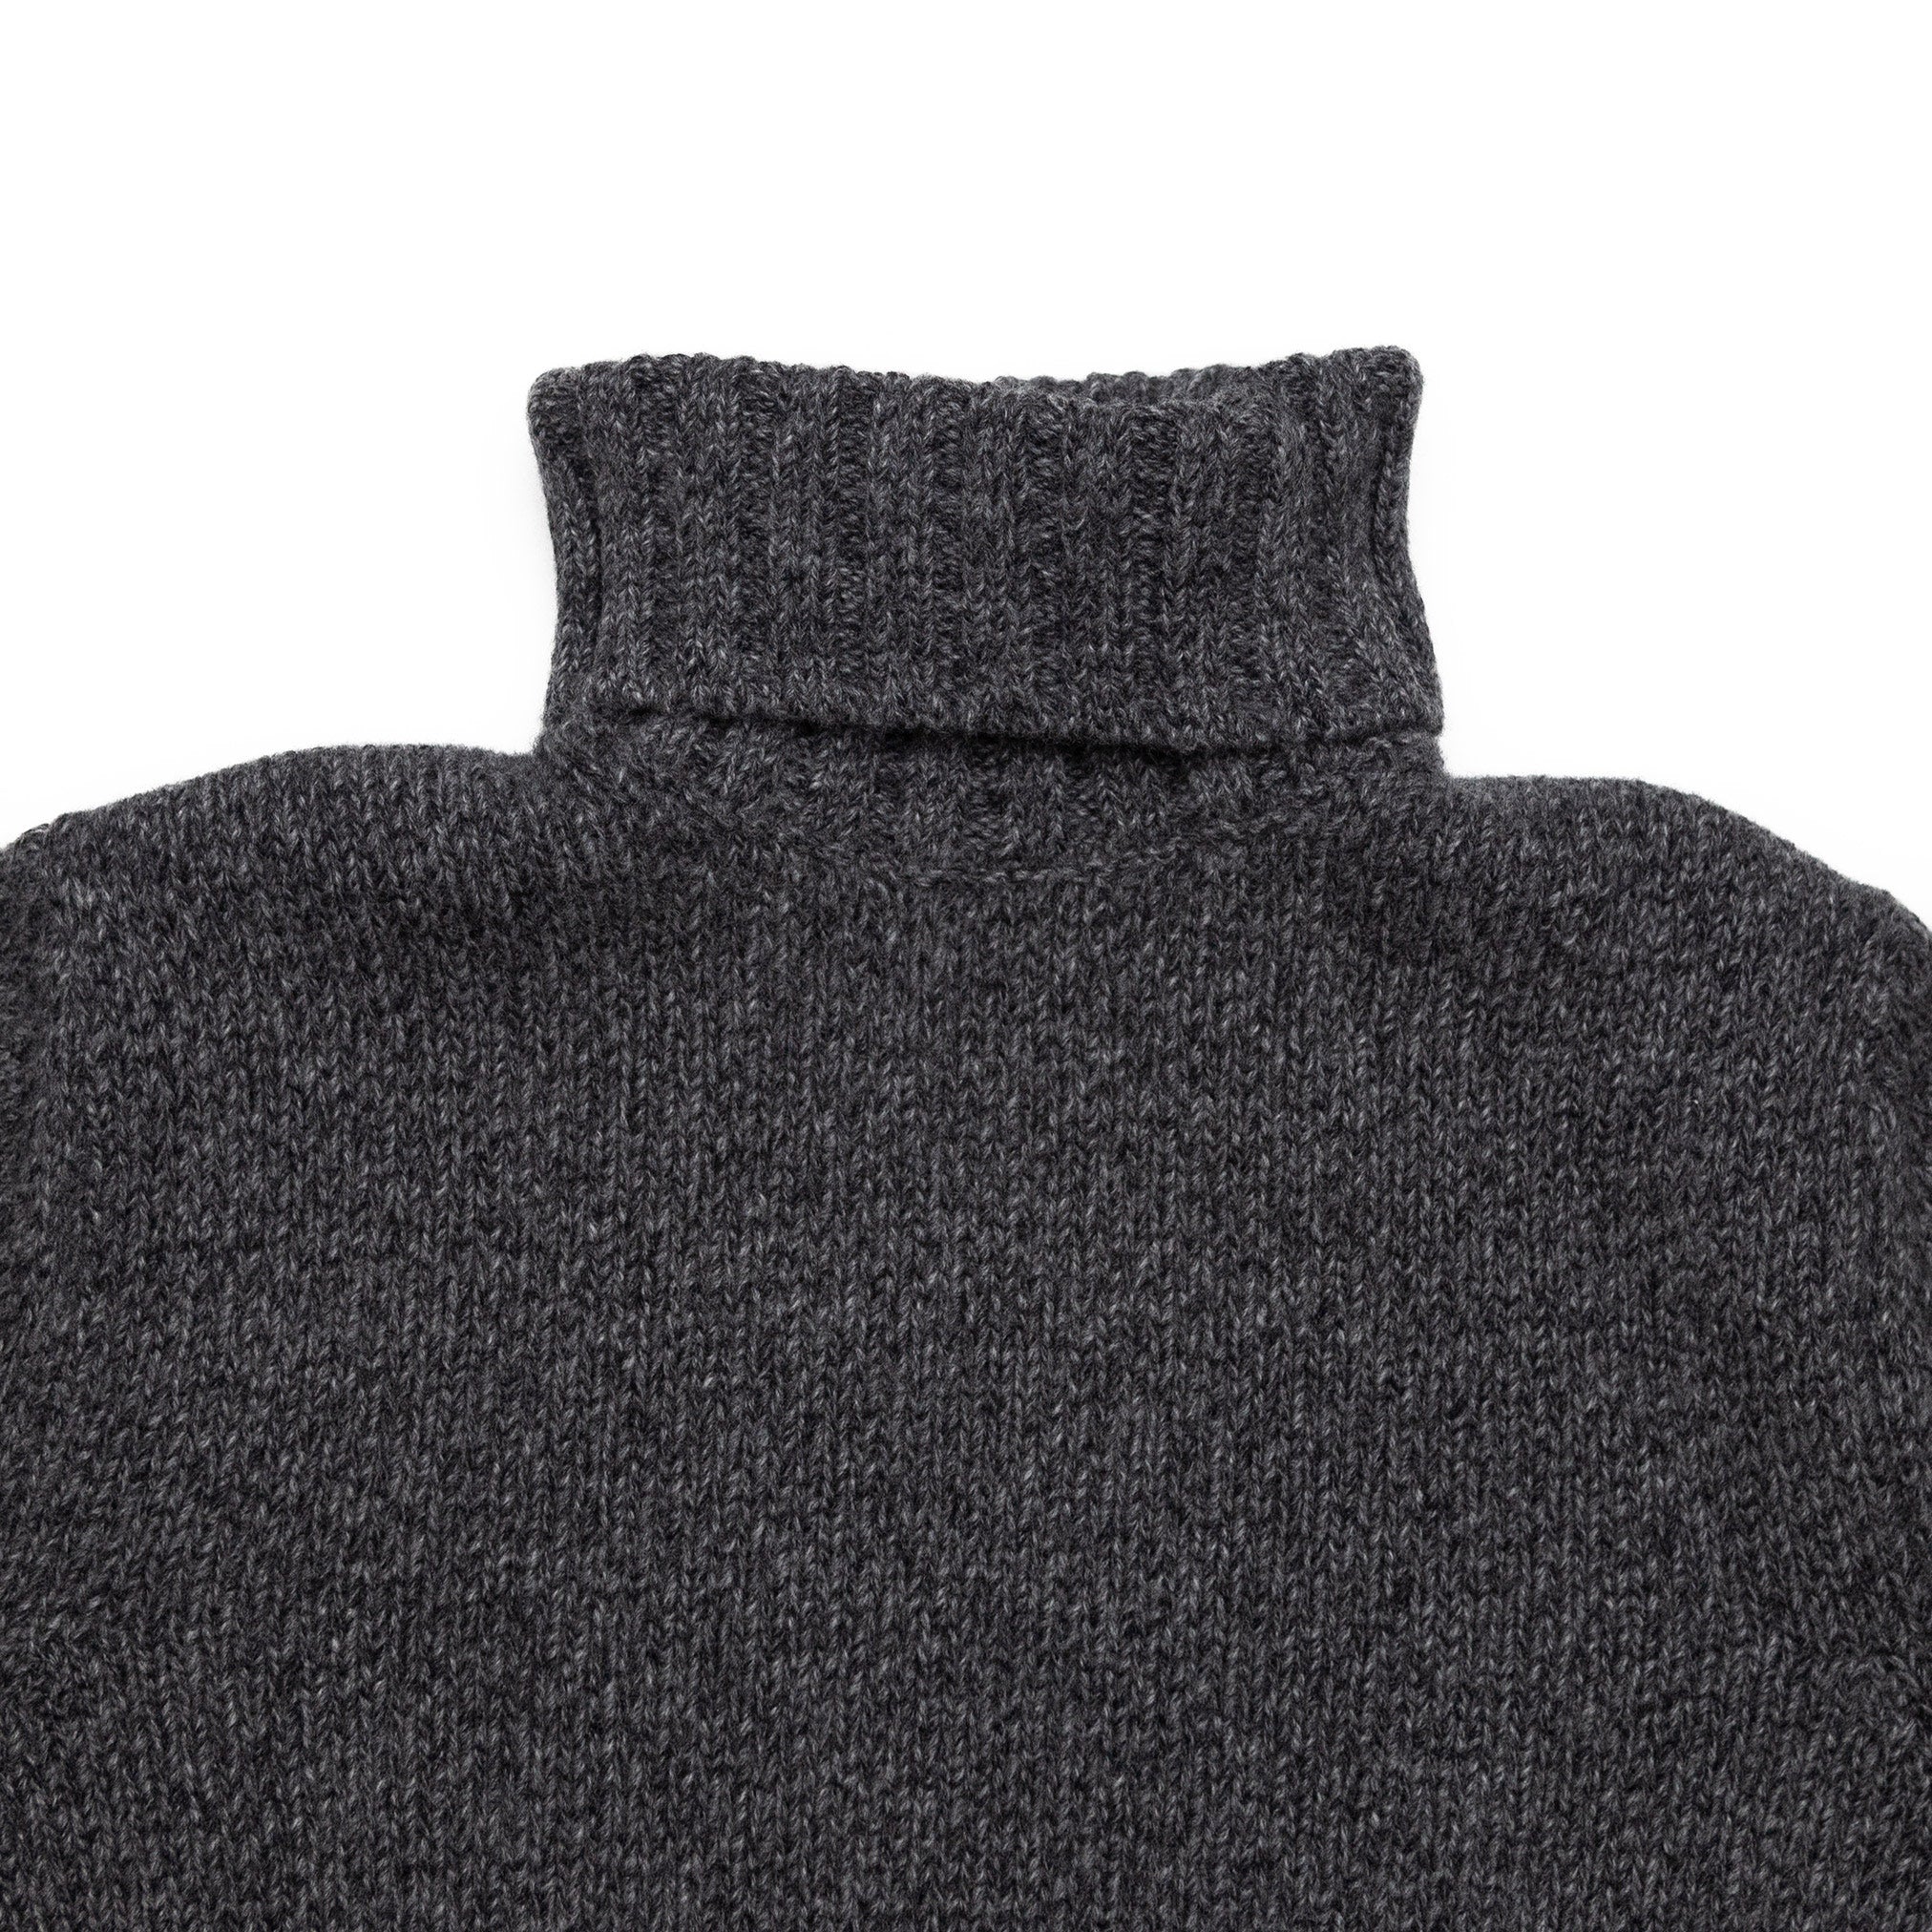 Dolcevita Sweater in Charcoal Melange